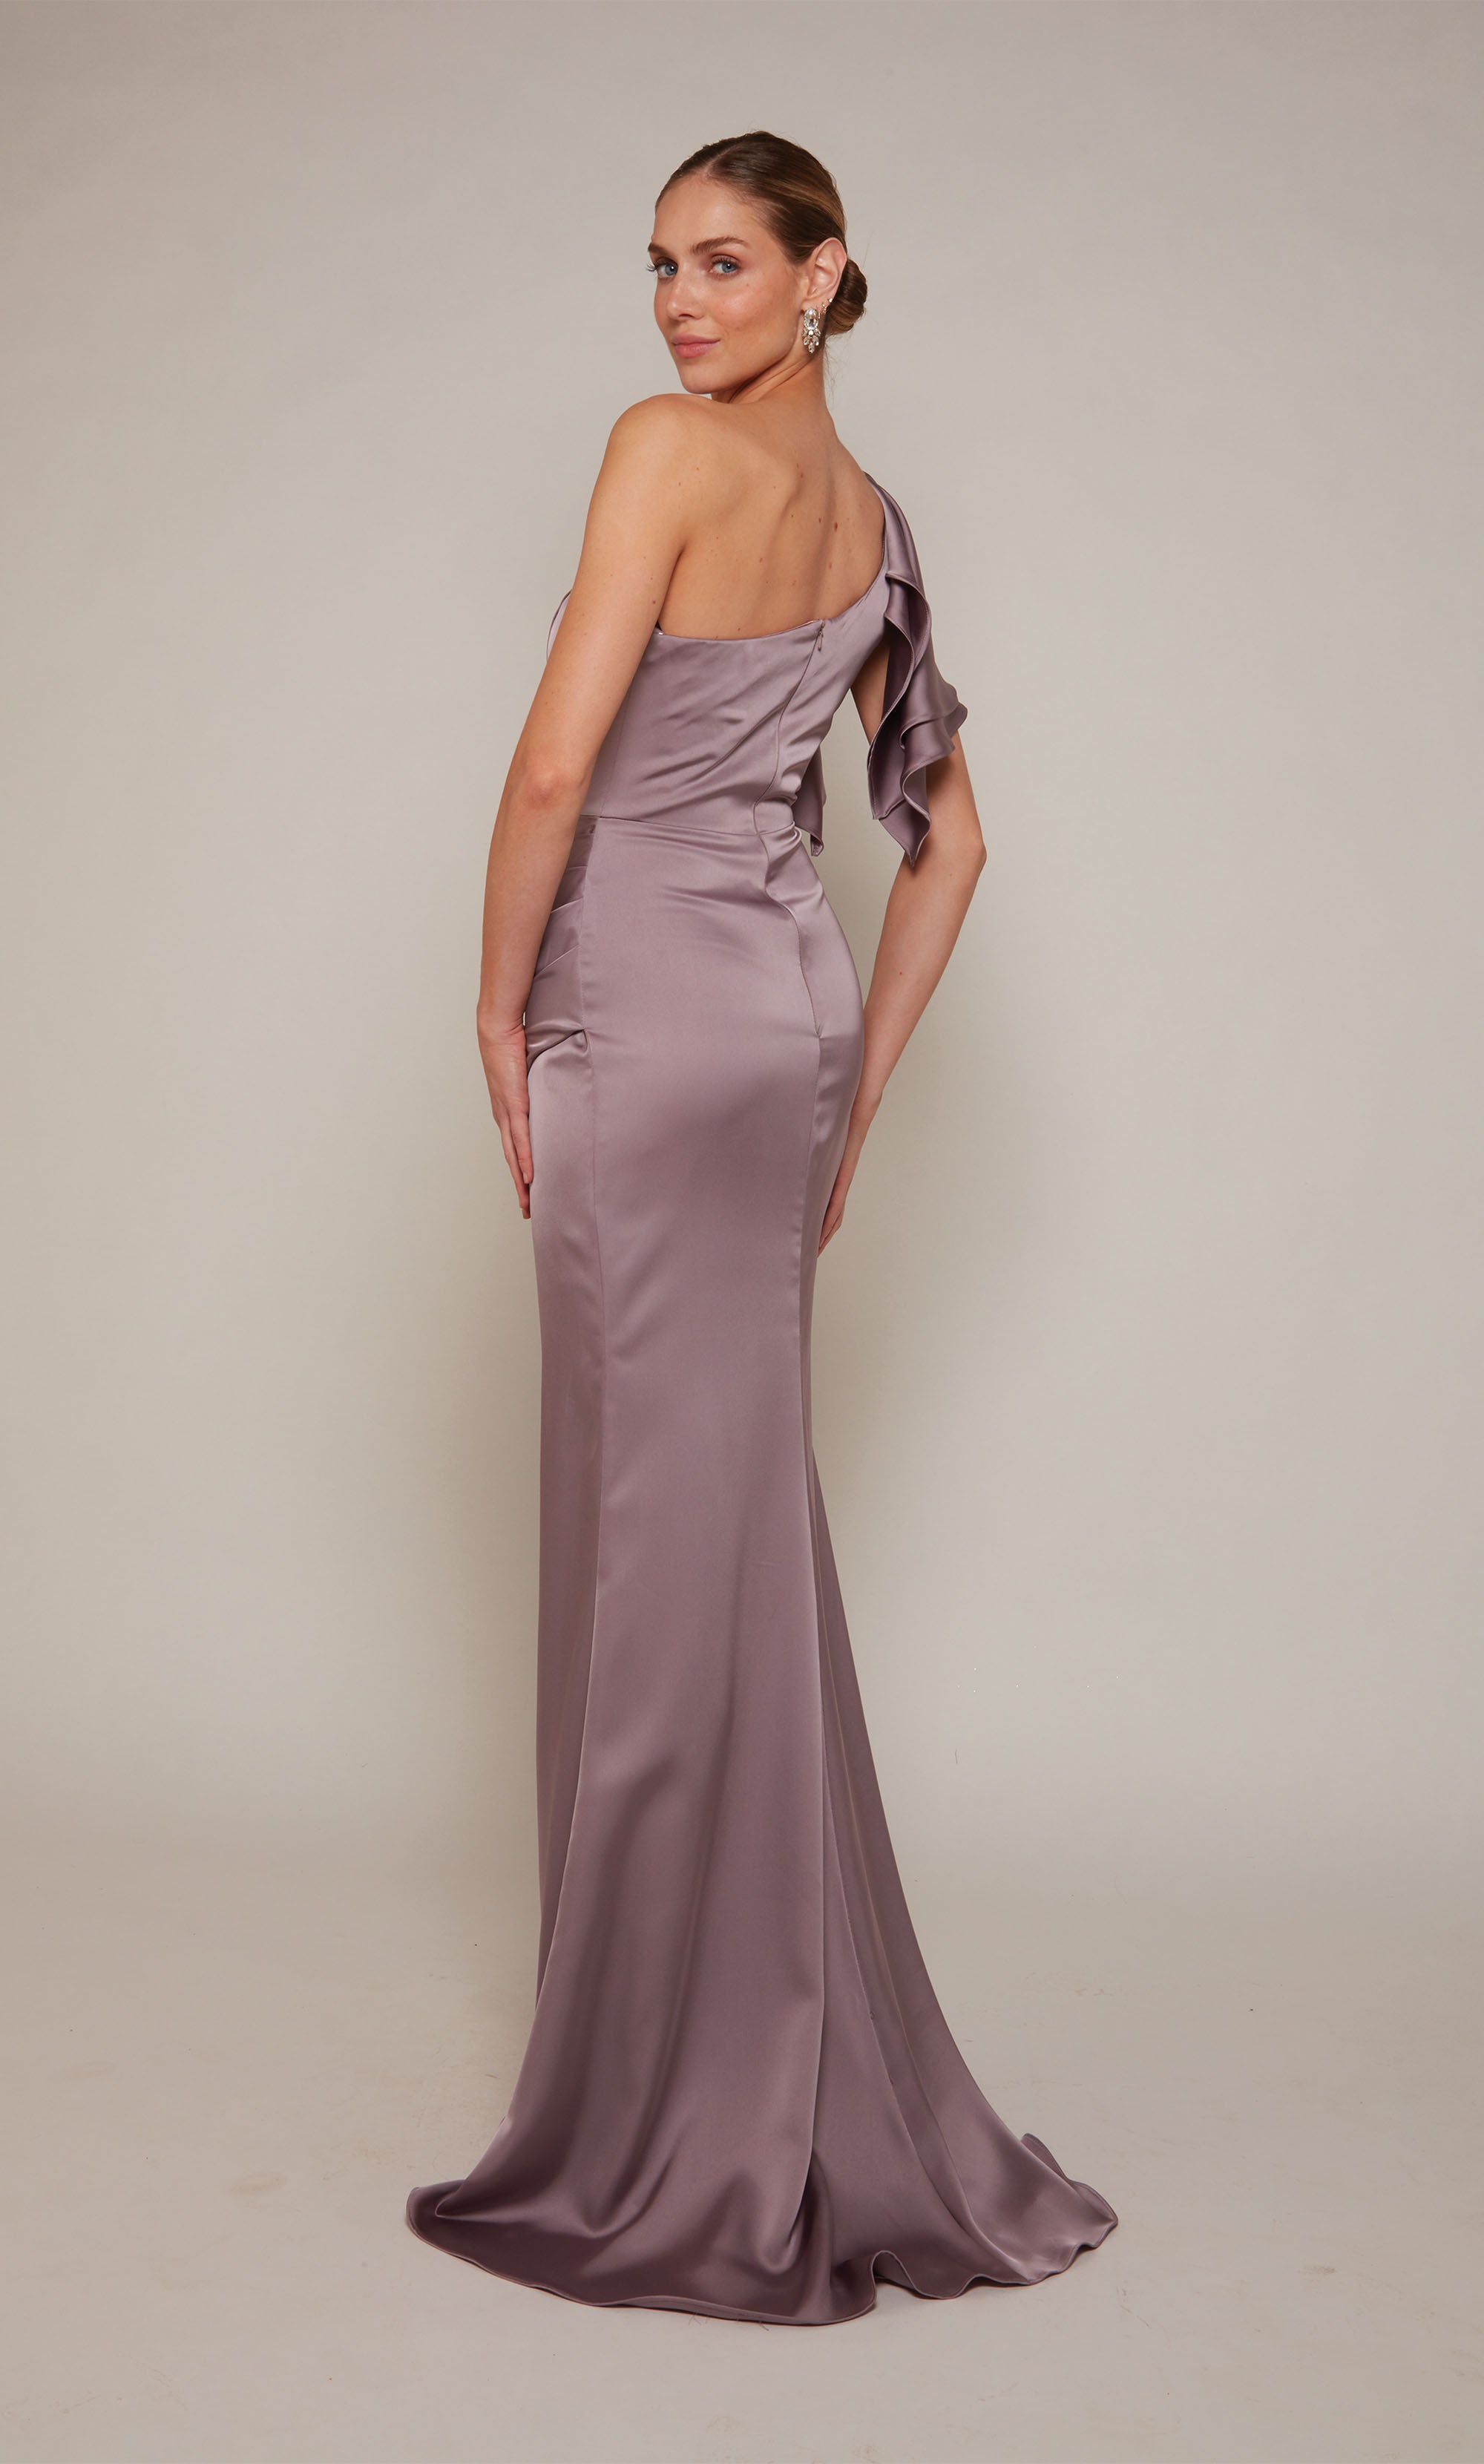 A satin, one shoulder ruffle dress with a pleated skirt and front slit in a dusty purple looking color called smoke.